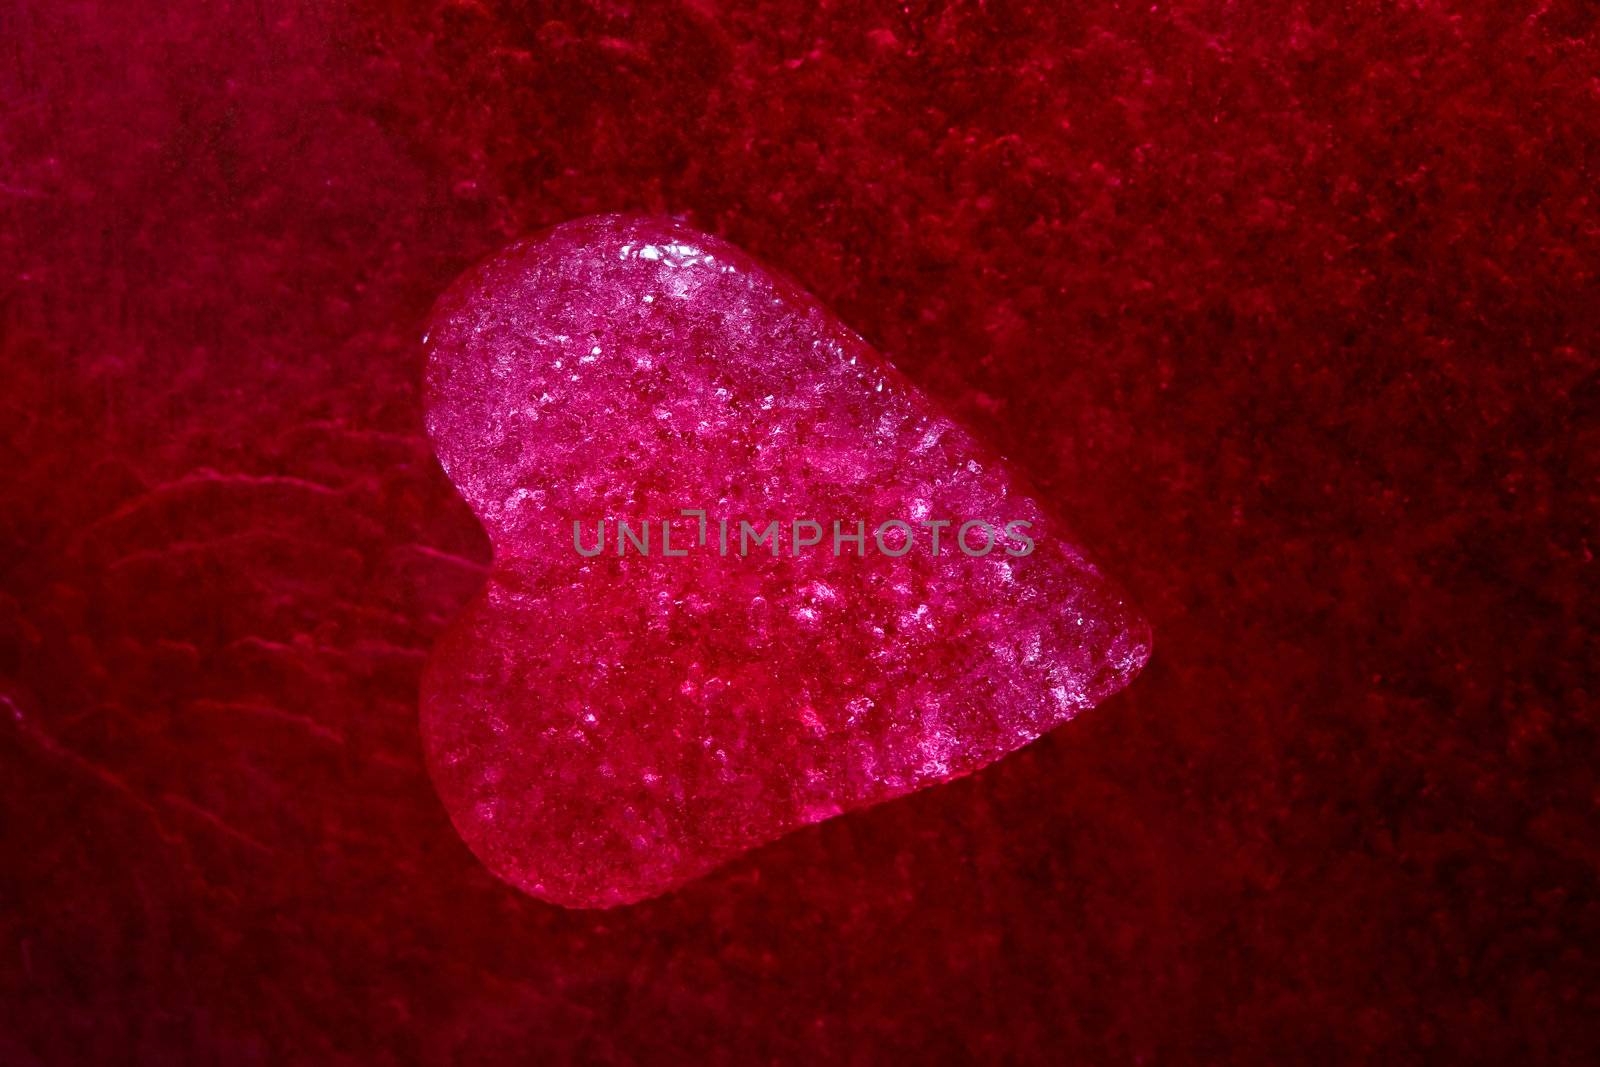 Stock photo: an image of a red icy heart on a purple background